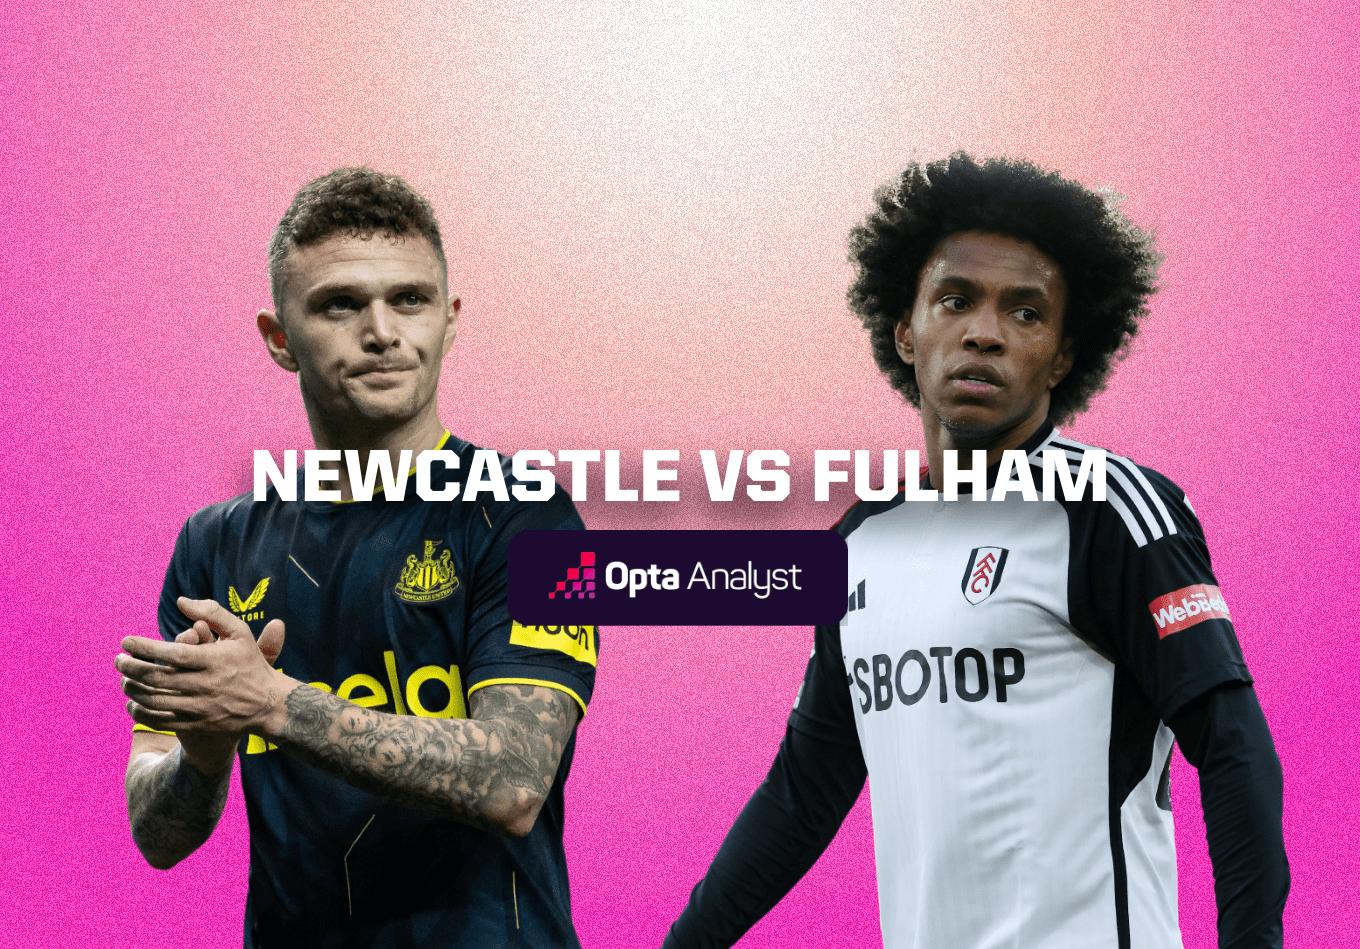 Newcastle vs Fulham: Prediction and Preview